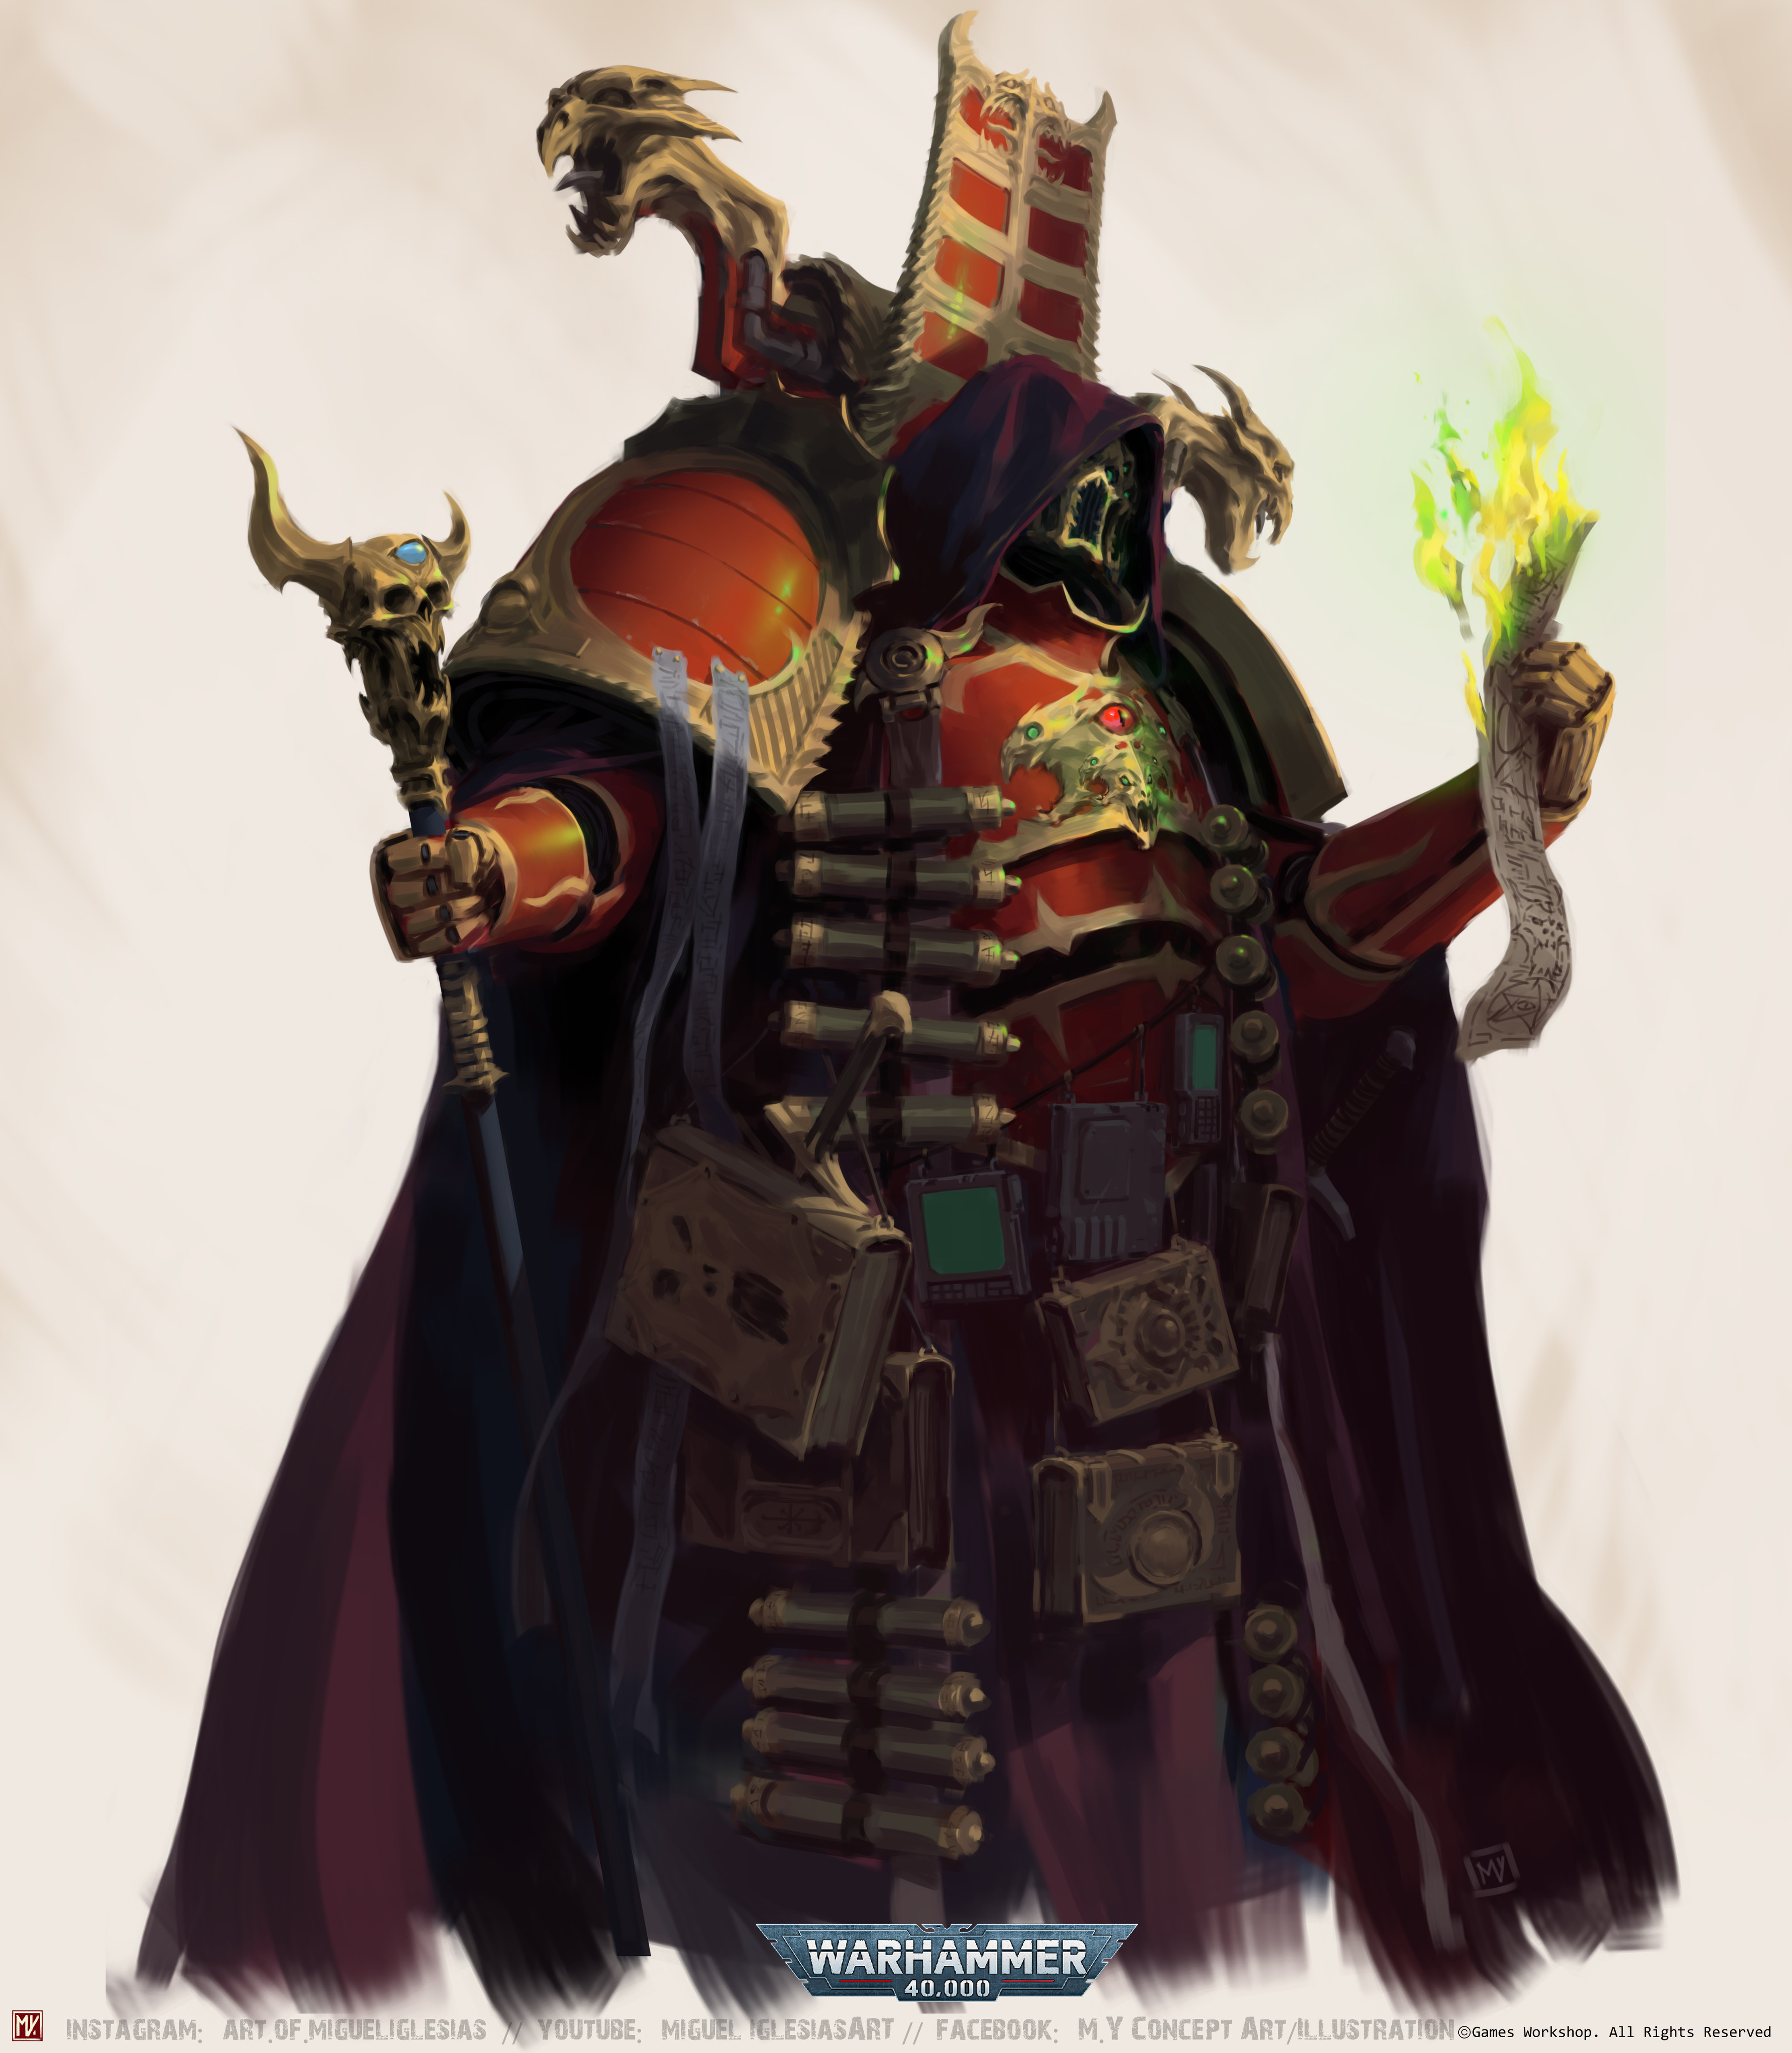 Miguel Iglesias - Warhammer 40k- Thousand Sons Sorcerer Cults